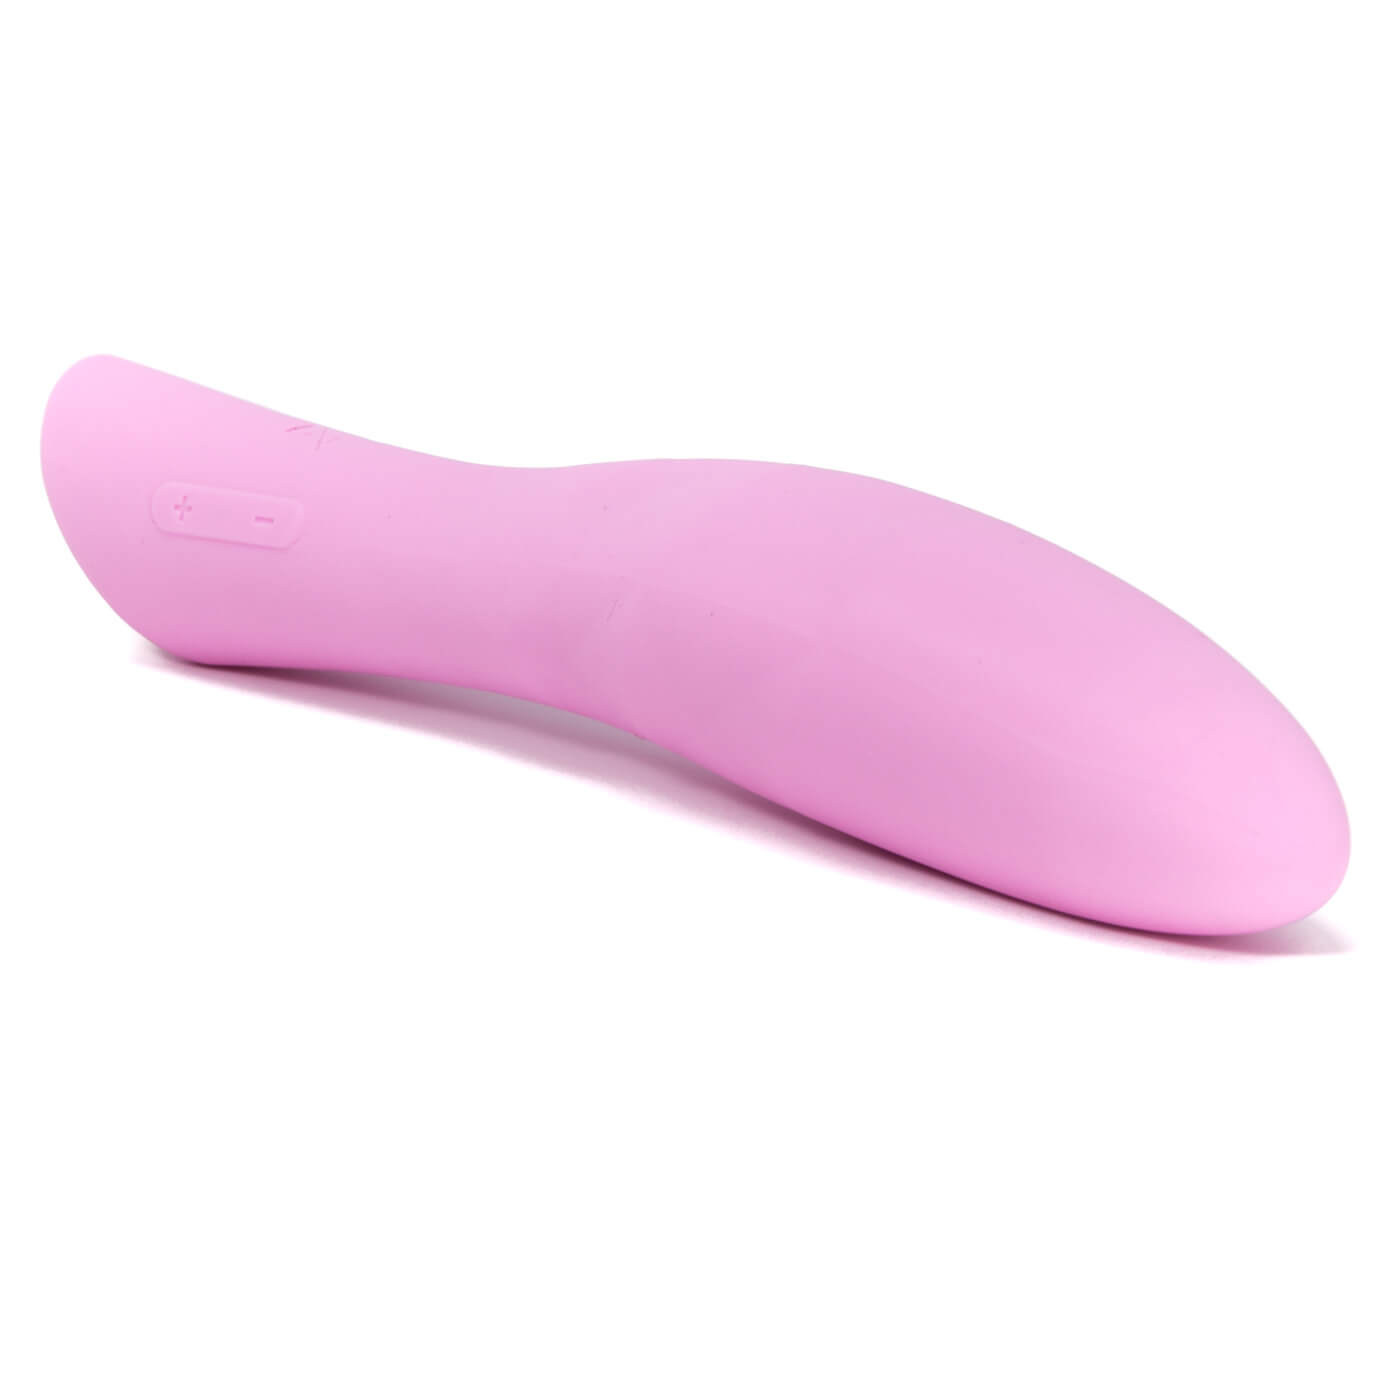 Jopen Amour 7 Function USB Rechargeable Vibrating Wand